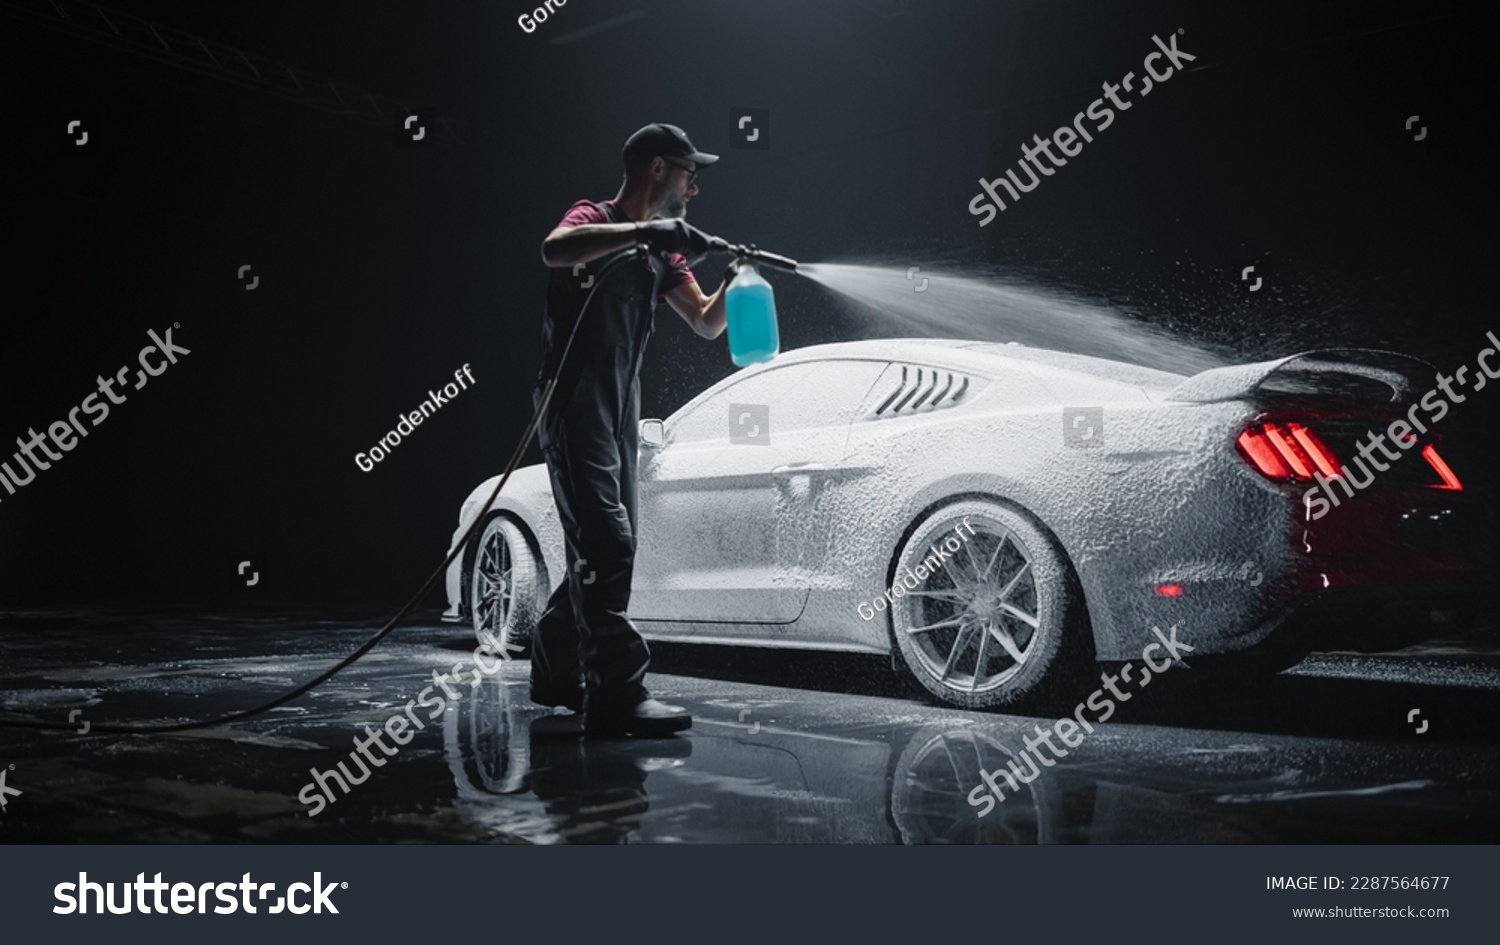 Professional Car Wash Specialist Applying Smart Foam to Prepare a Modern Red Sportscar with Retro Design for Sale at a Dealership Car Center. Commercial Studio Photo for Advertising #2287564677